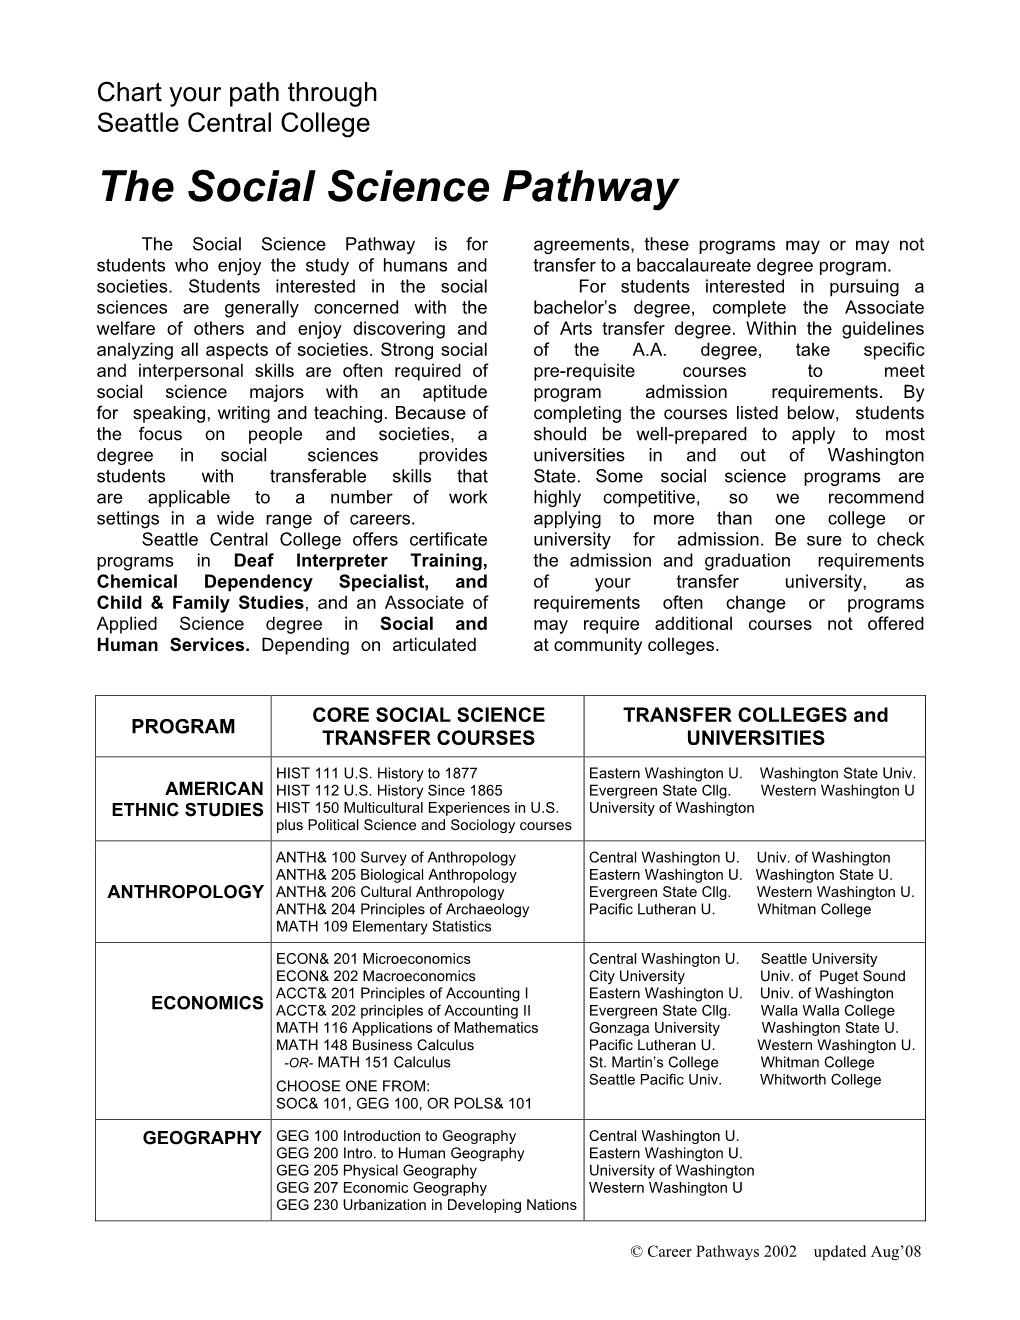 The Social Science Pathway